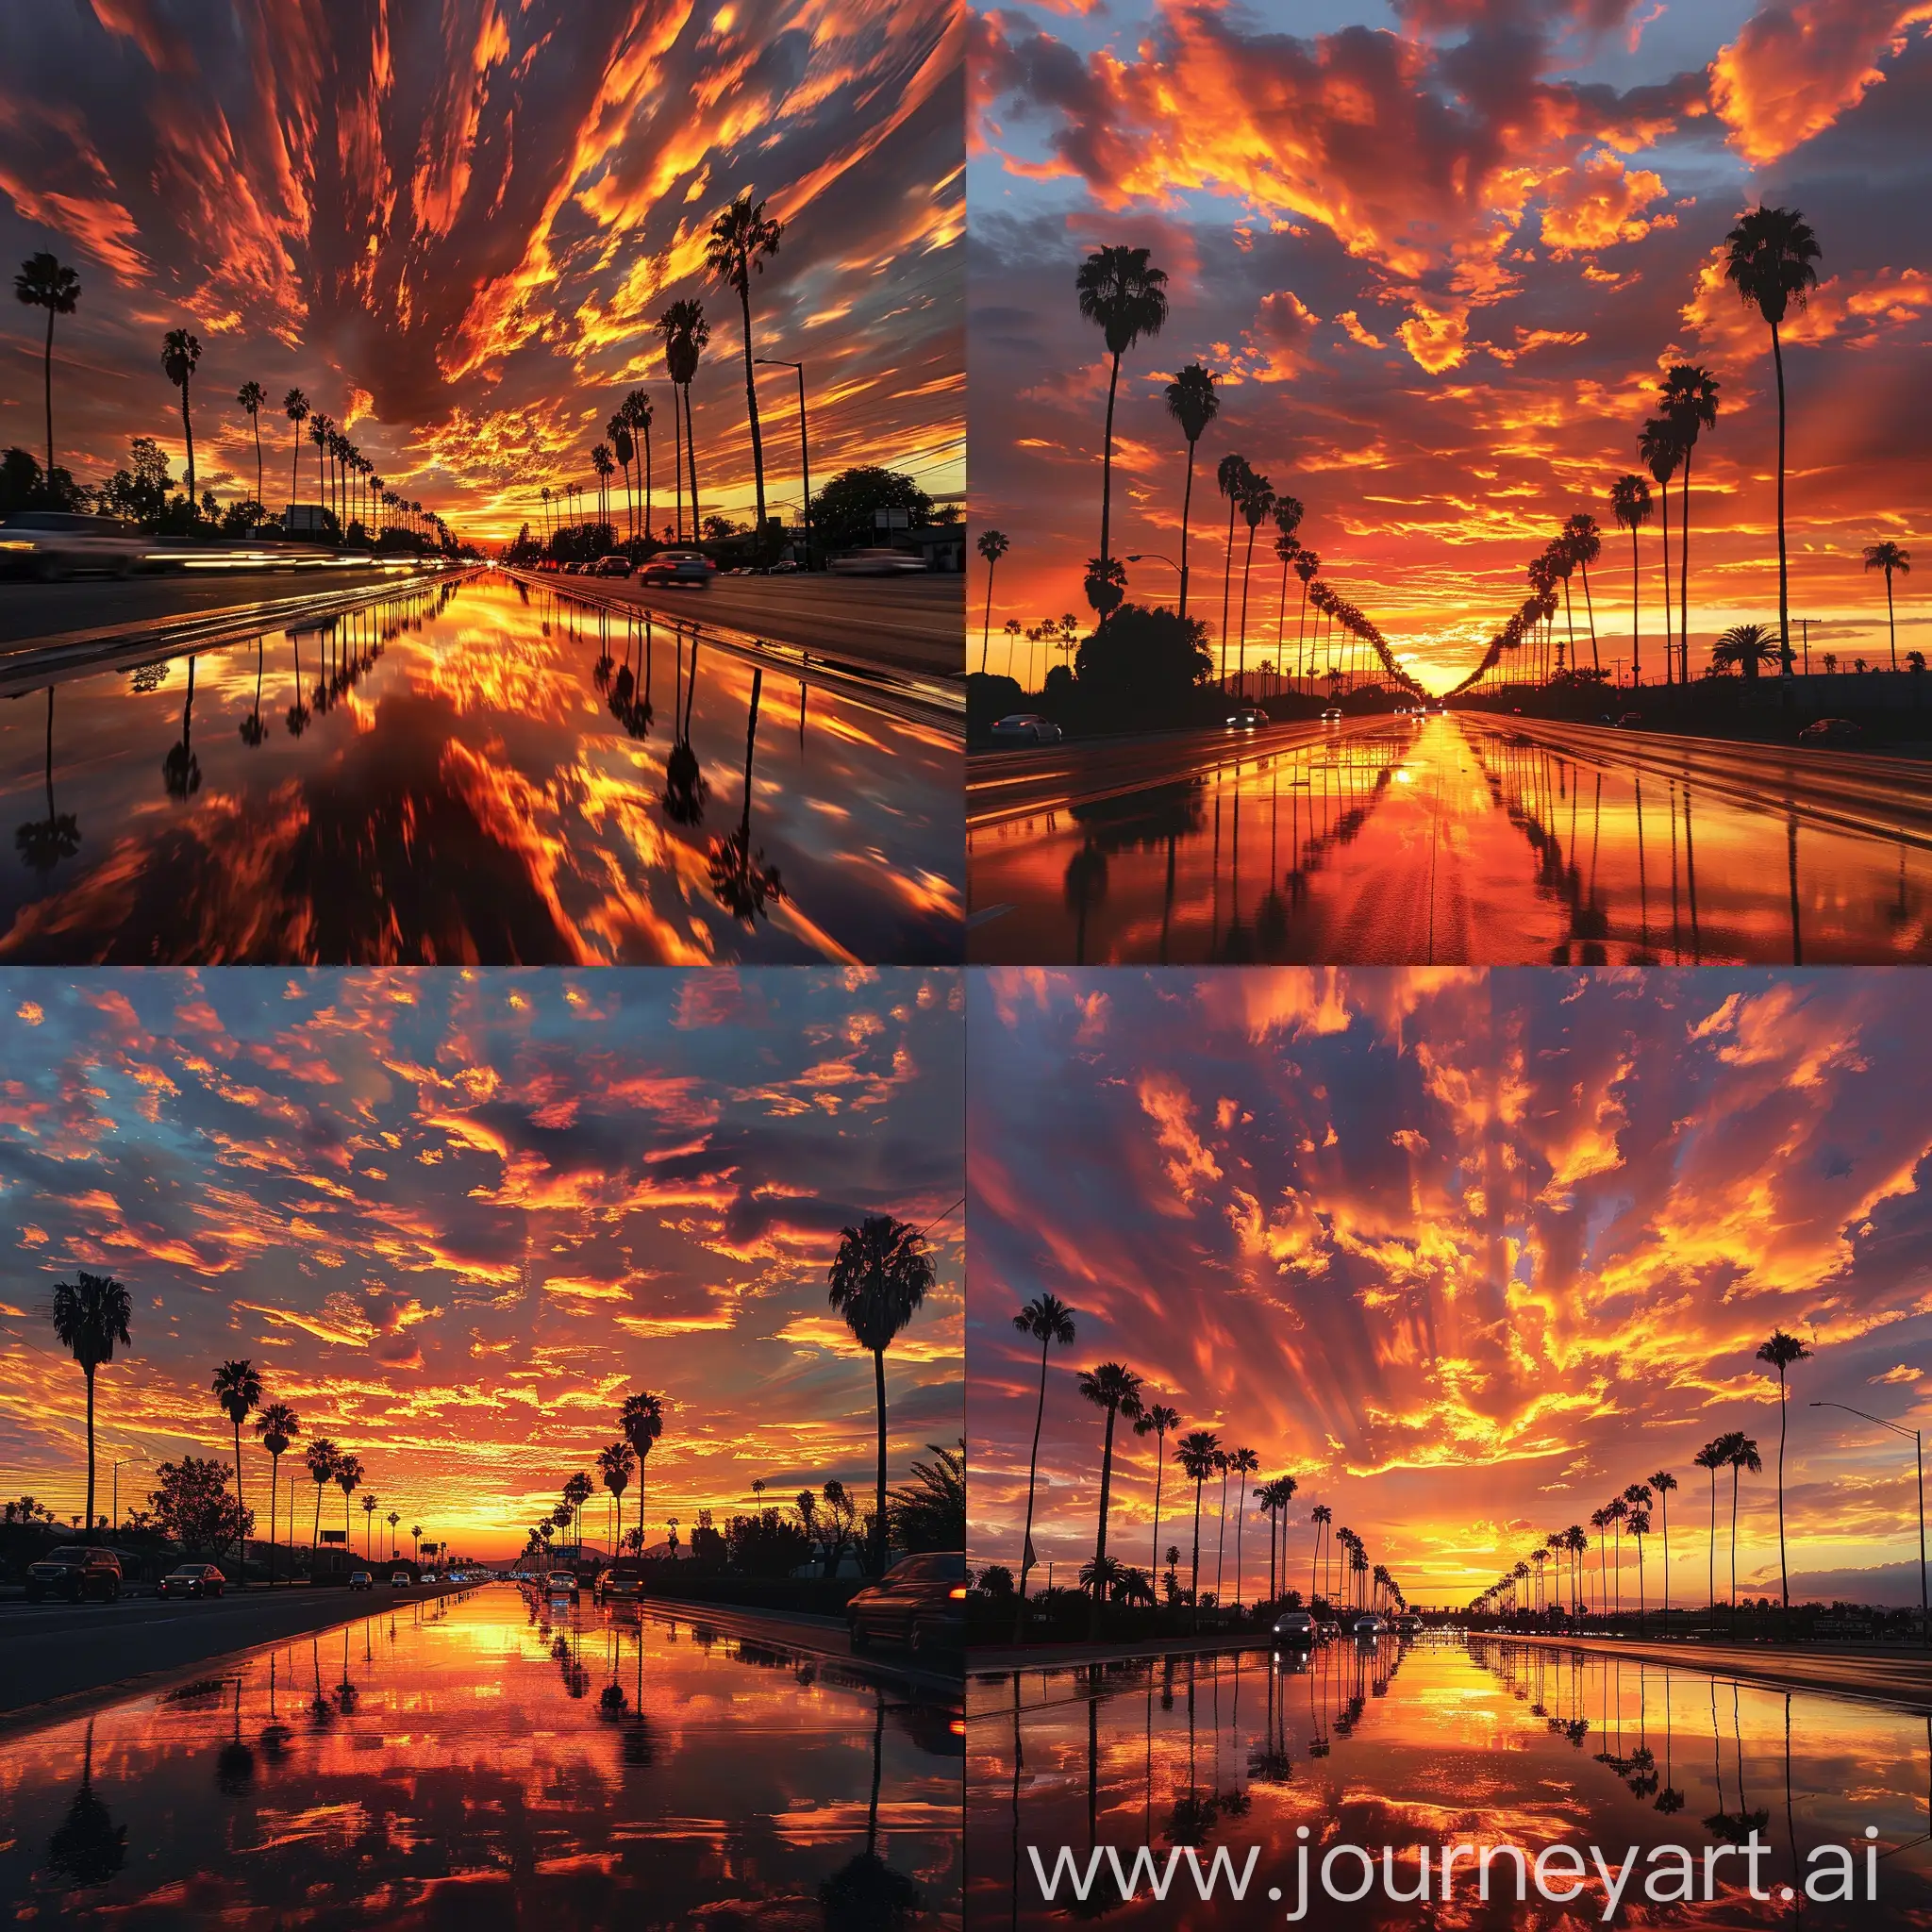 "prompt": "An image of a vibrant sunset sky with dramatic clouds and streaks of orange and red colors, reflecting on the surface of a road that leads towards the horizon. There are silhouettes of palm trees lining the road, and cars are driving on the road, capturing the sense of motion and travel during a breathtaking sunset.",
  "size": "1024x1024"